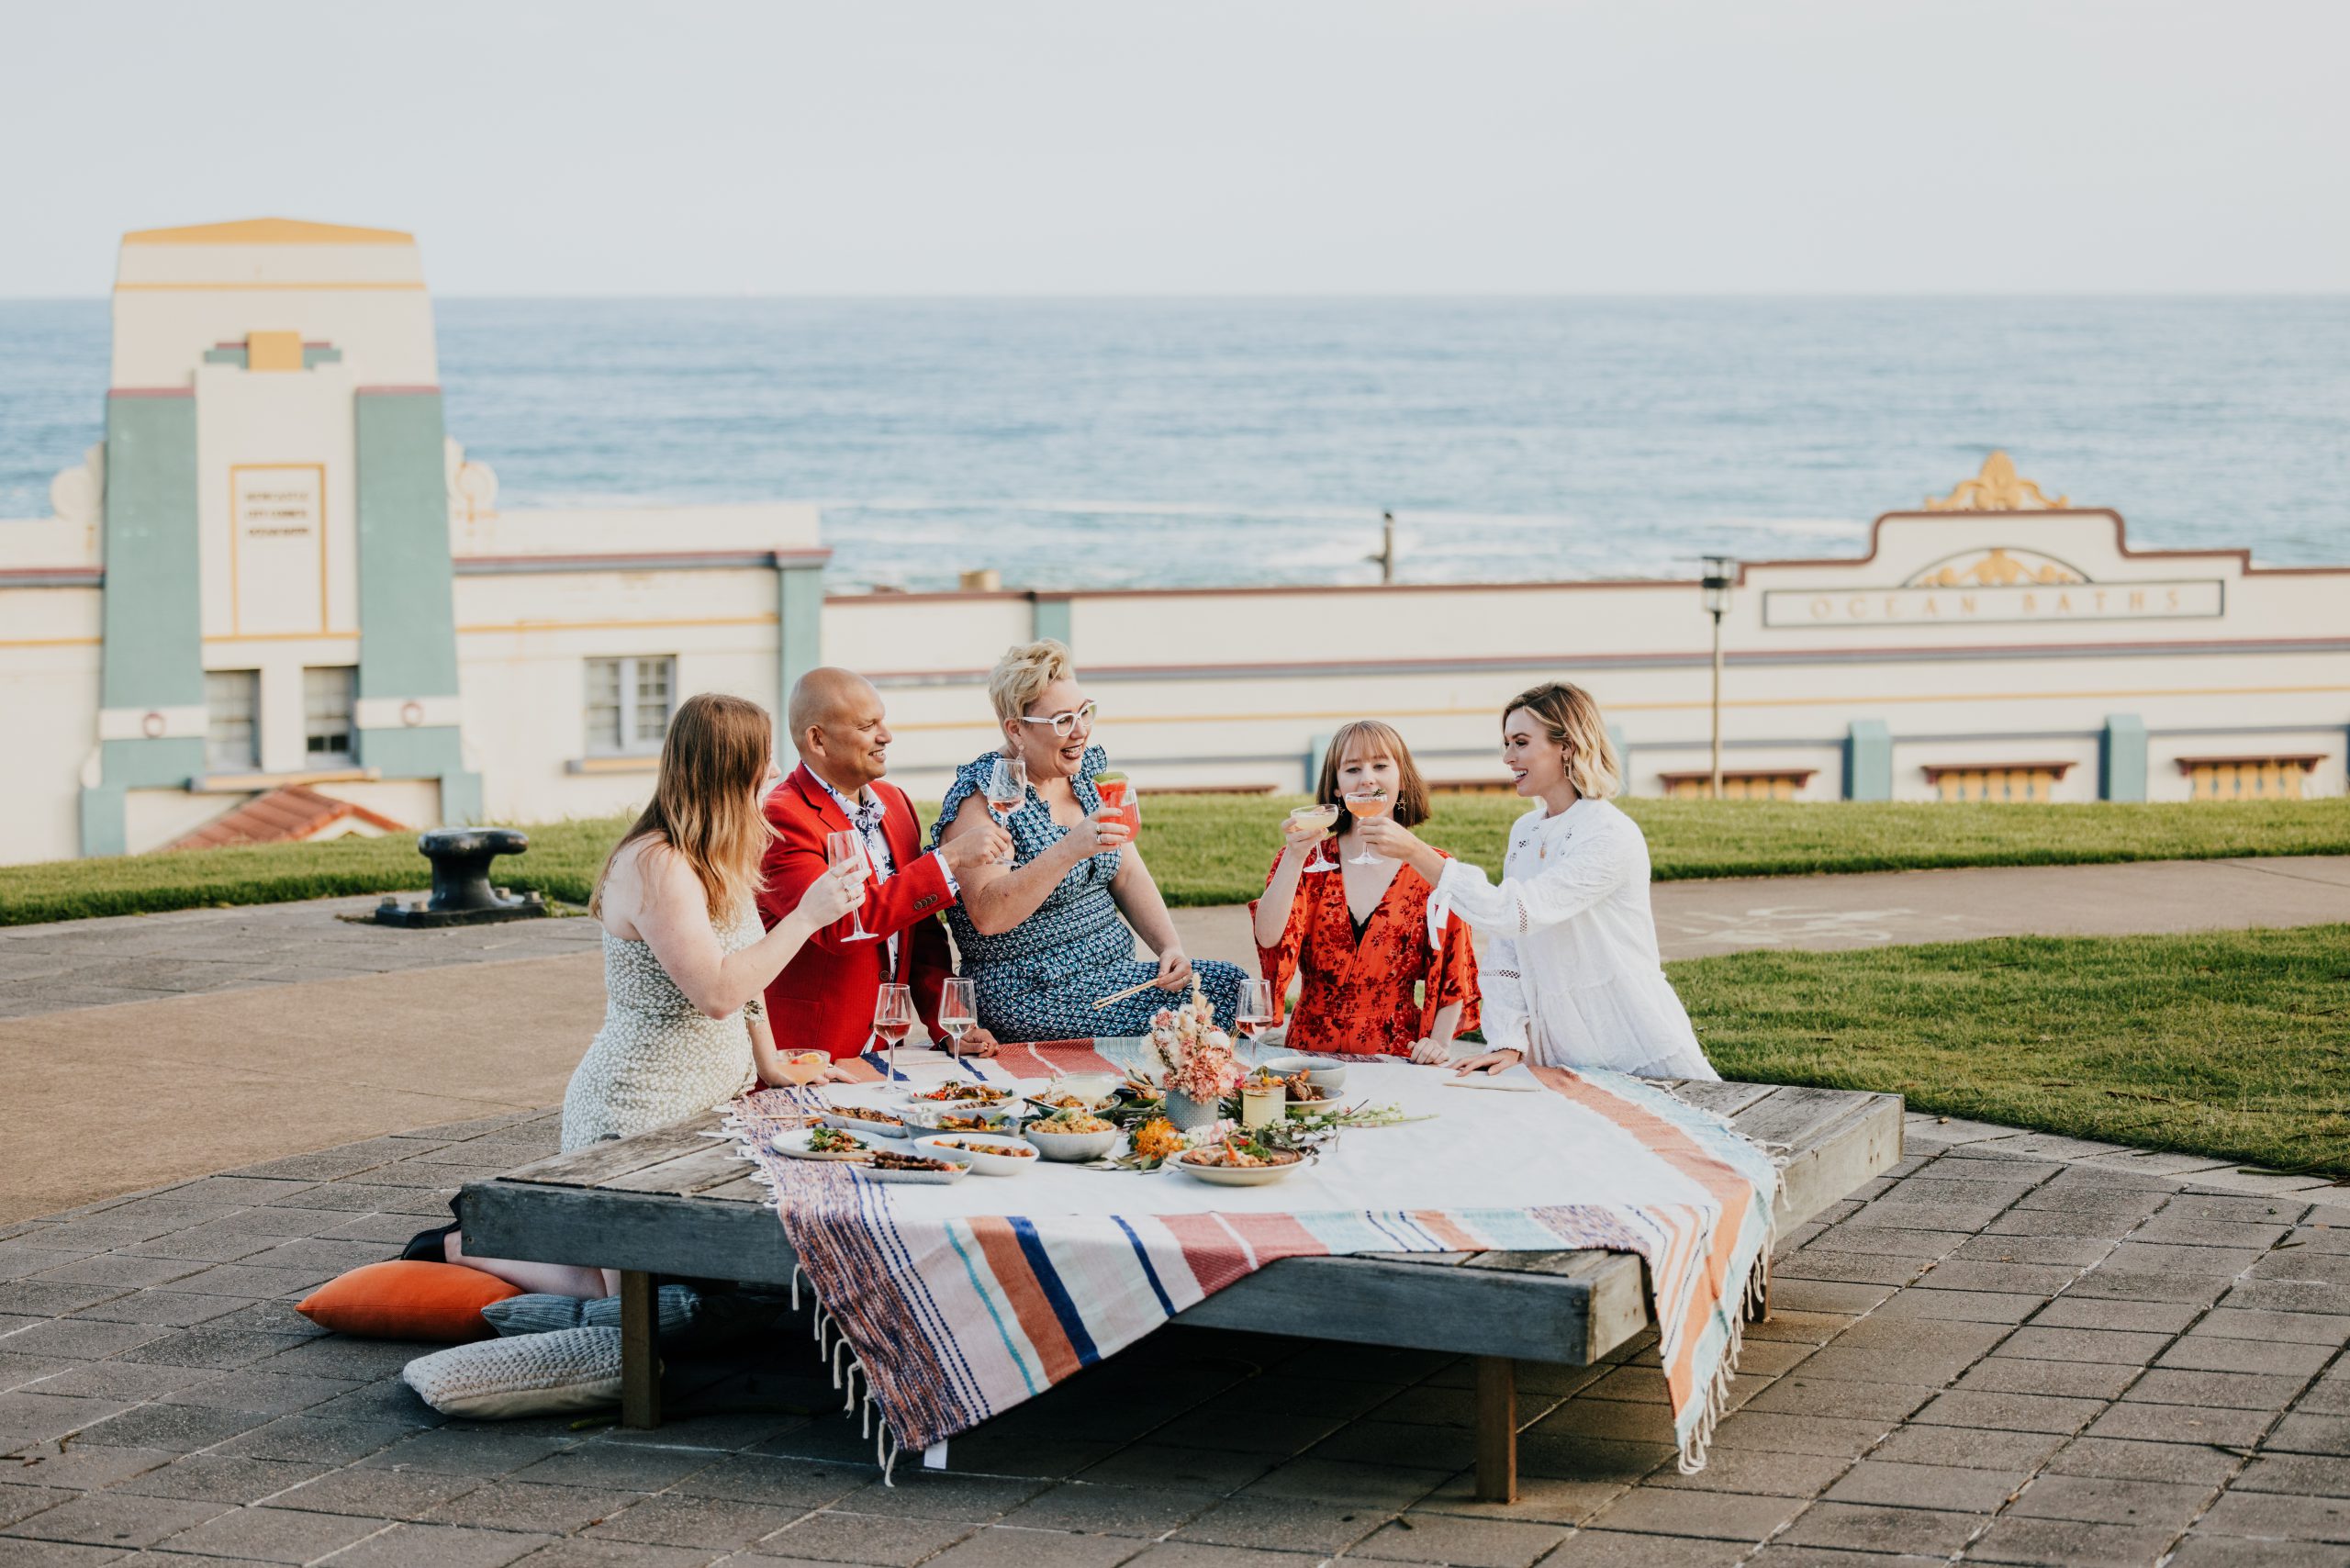 Beach picnic at Newcastle food month